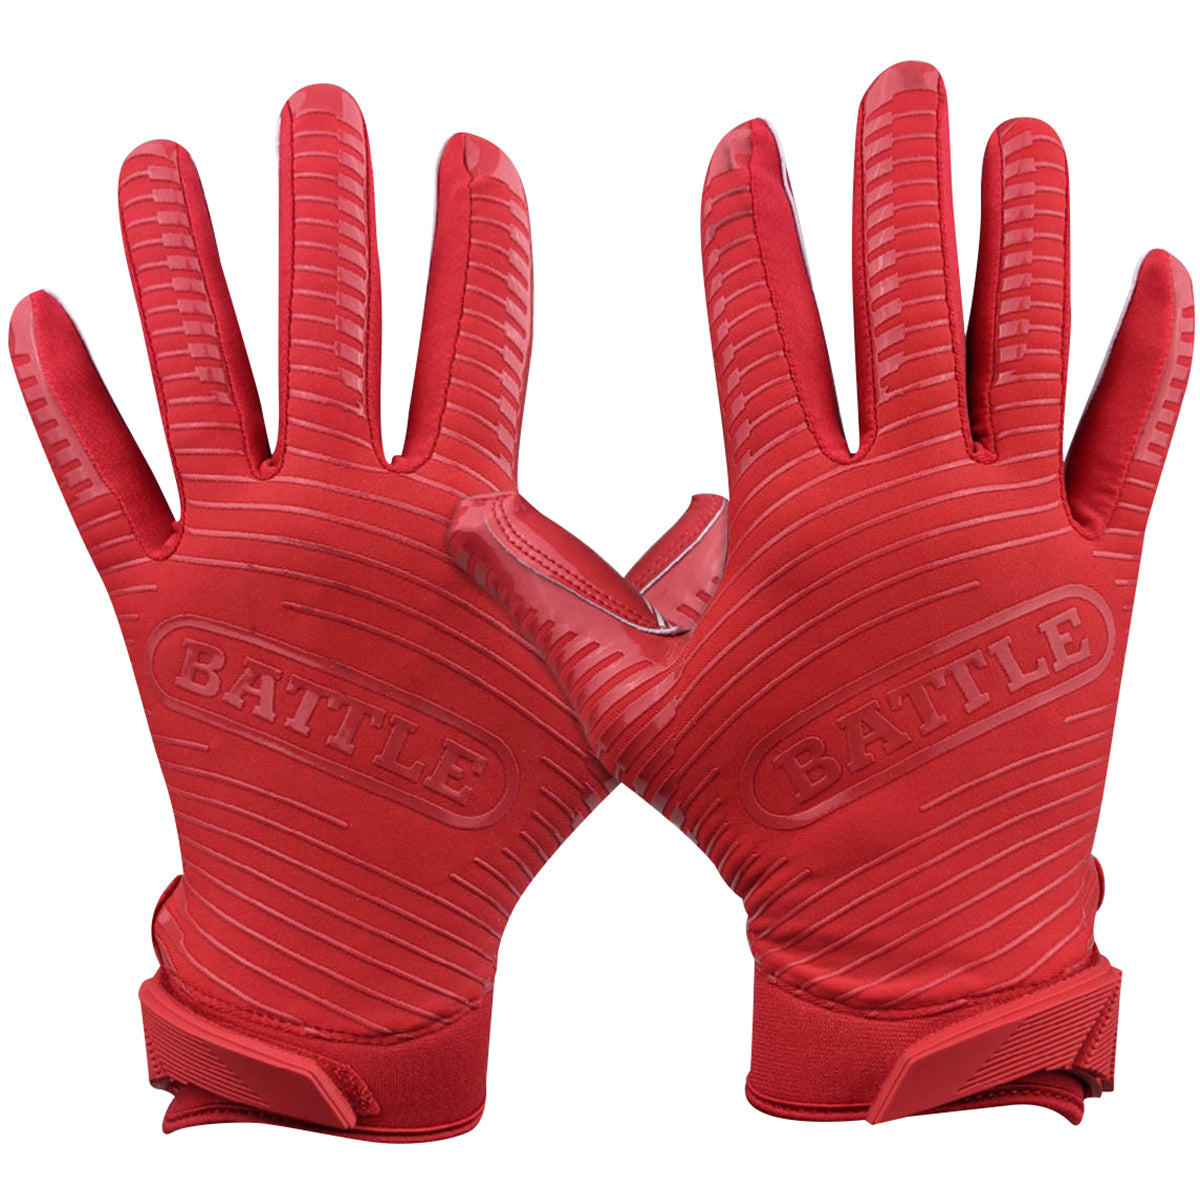 Battle Sports Doom 1.0 Youth Football Receiver Gloves - Red Battle Sports